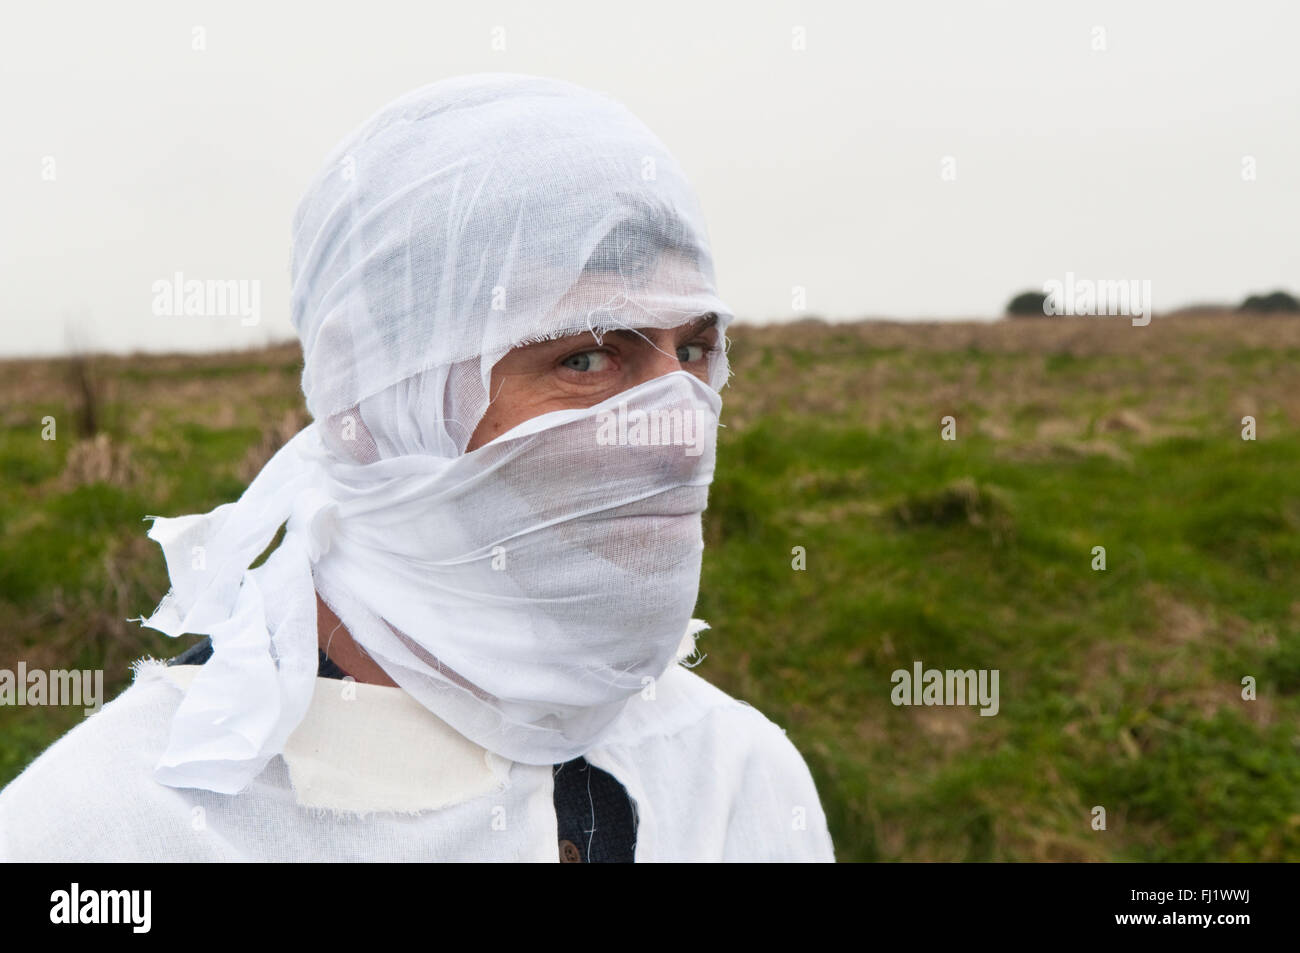 Man with his head in white bandages standing in a field Stock Photo